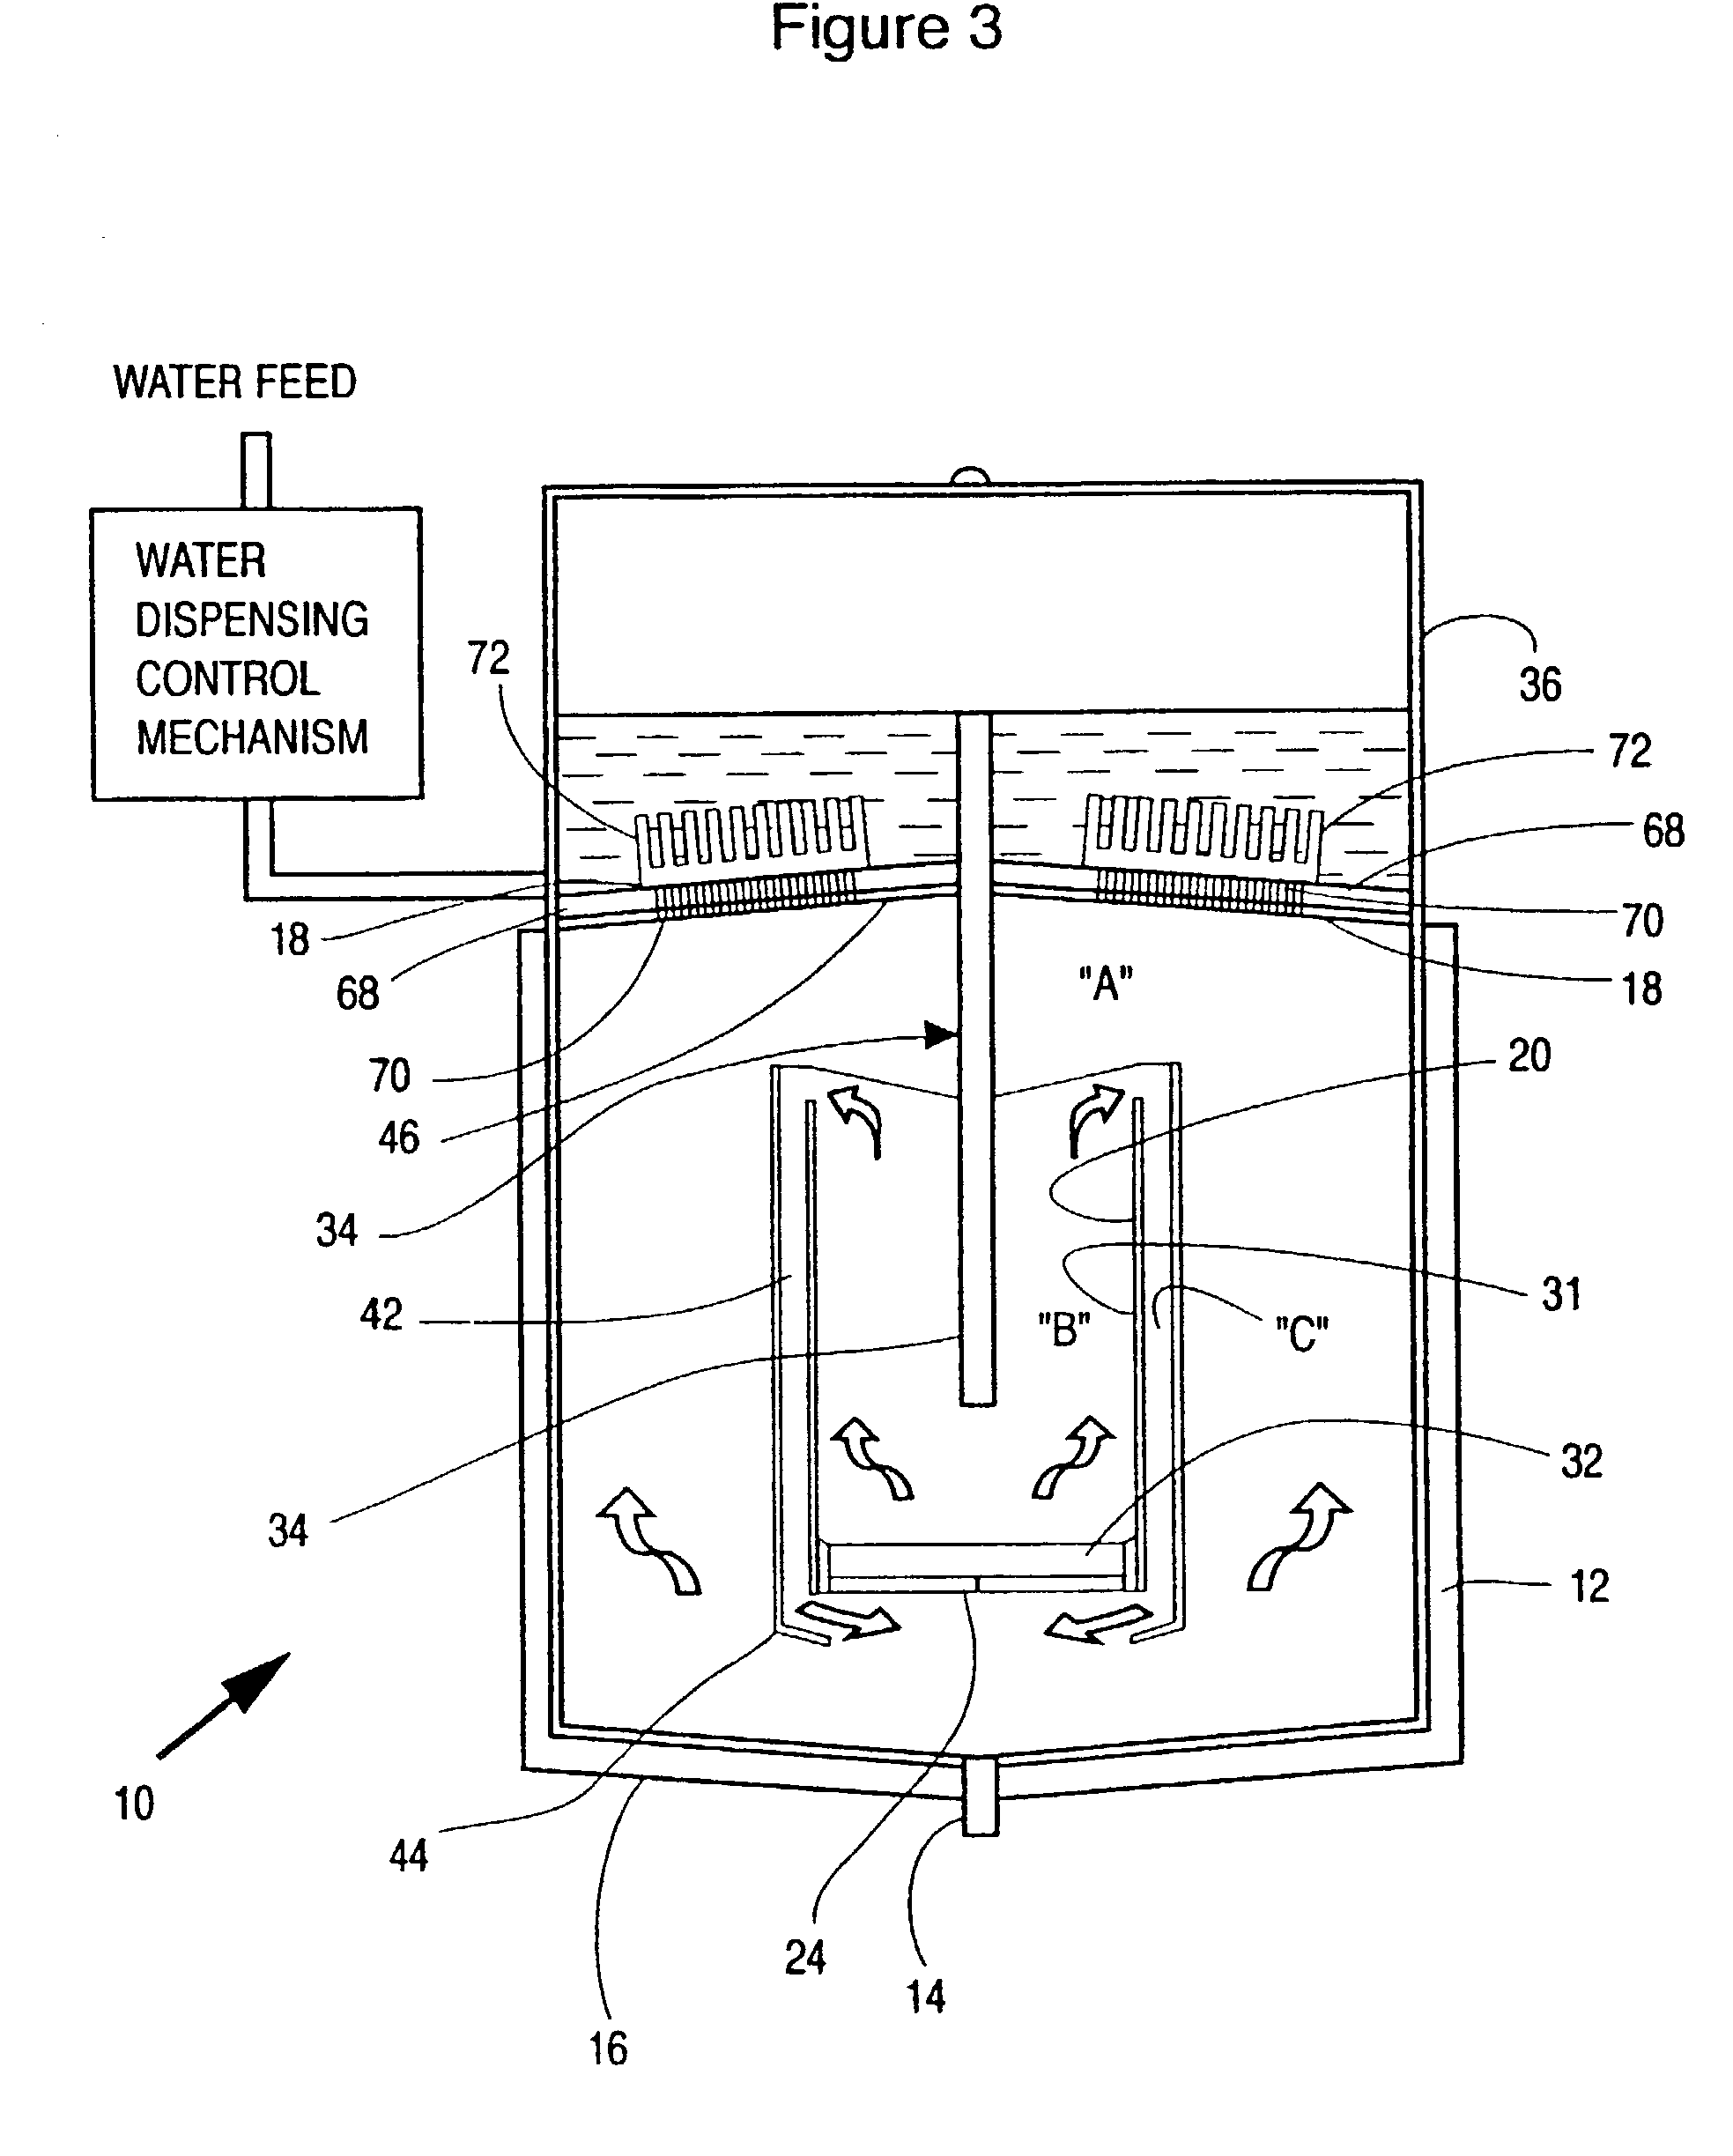 Apparatus and process for purifying a liquid by thermoelectric peltier means